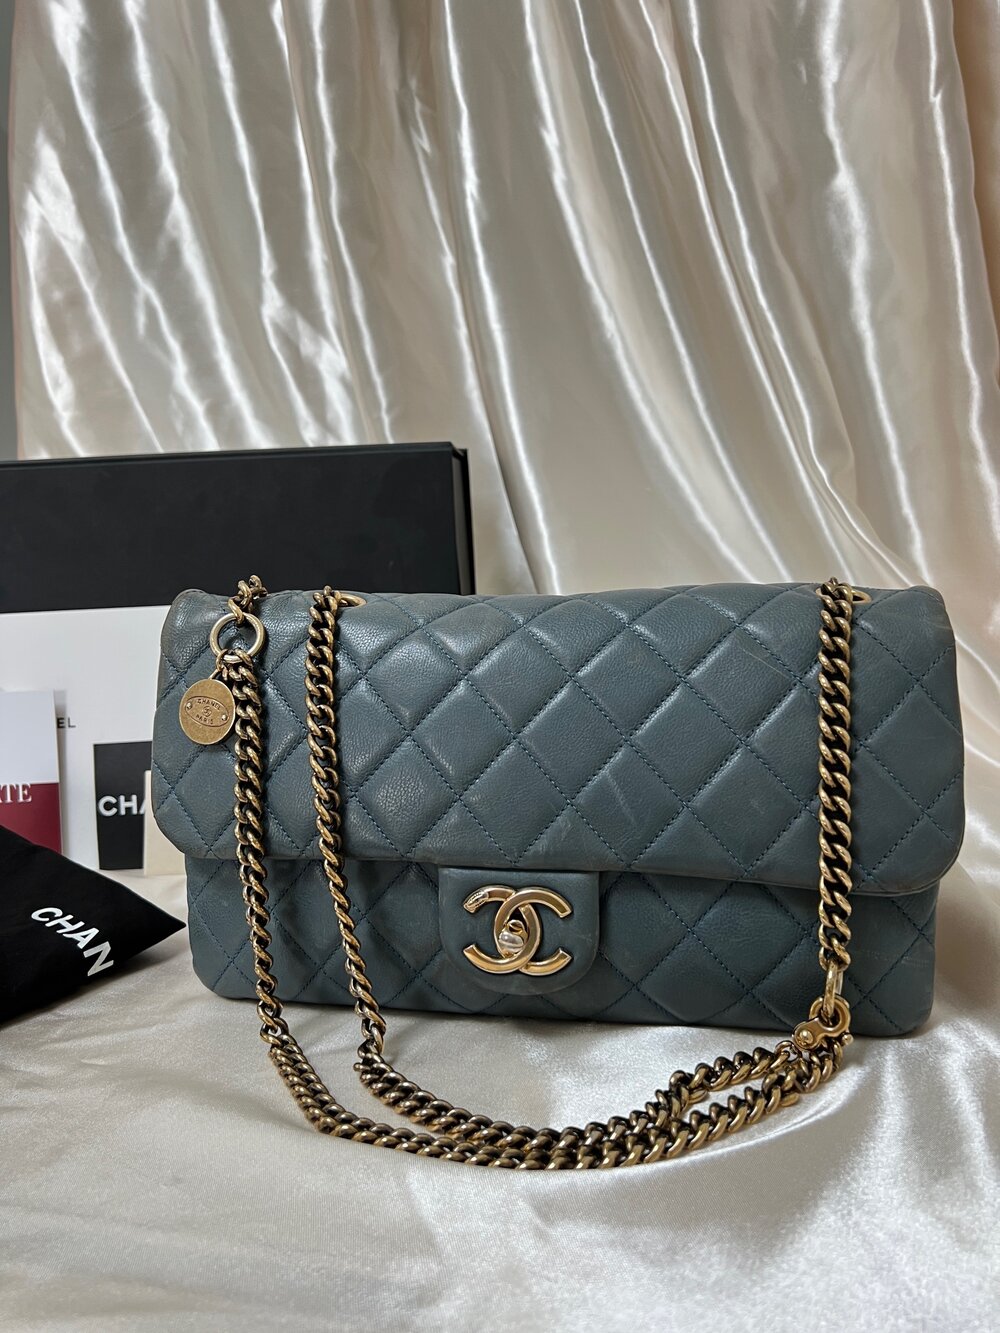 Chanel Blue Iridescent Quilted Leather Large Bag